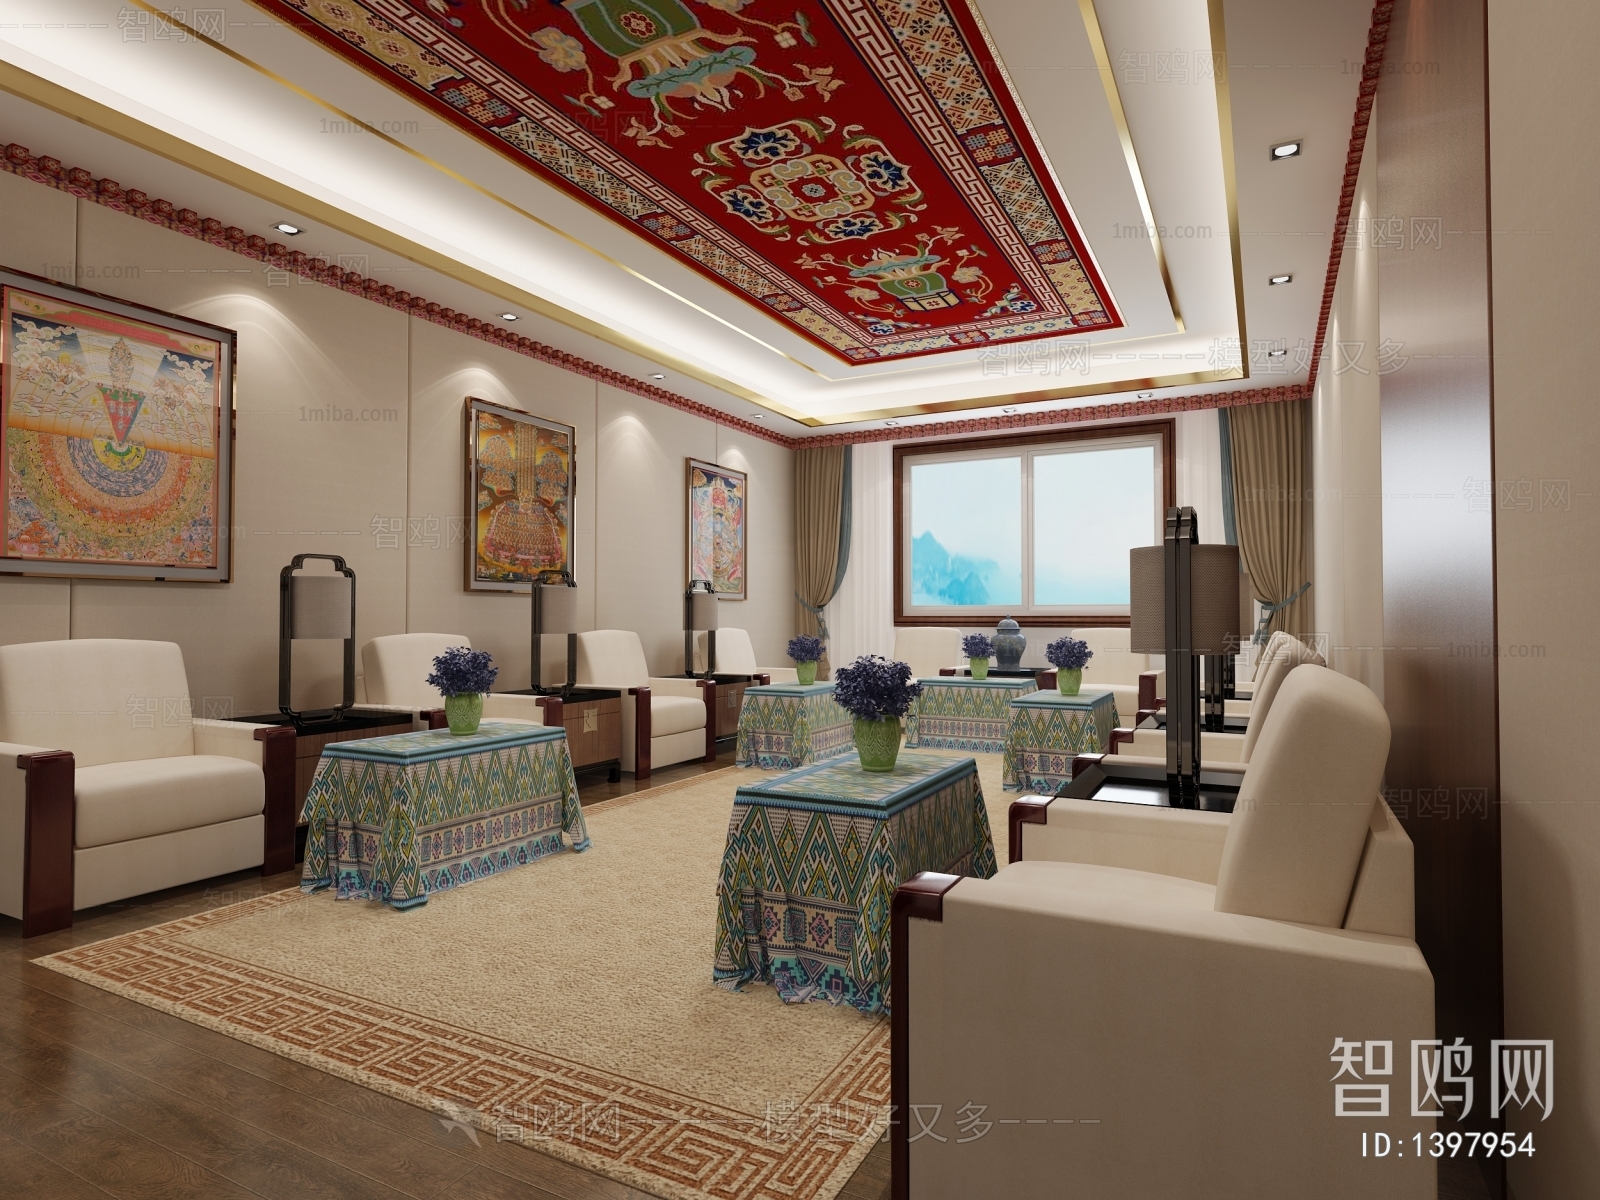 Southeast Asian Style Reception Room